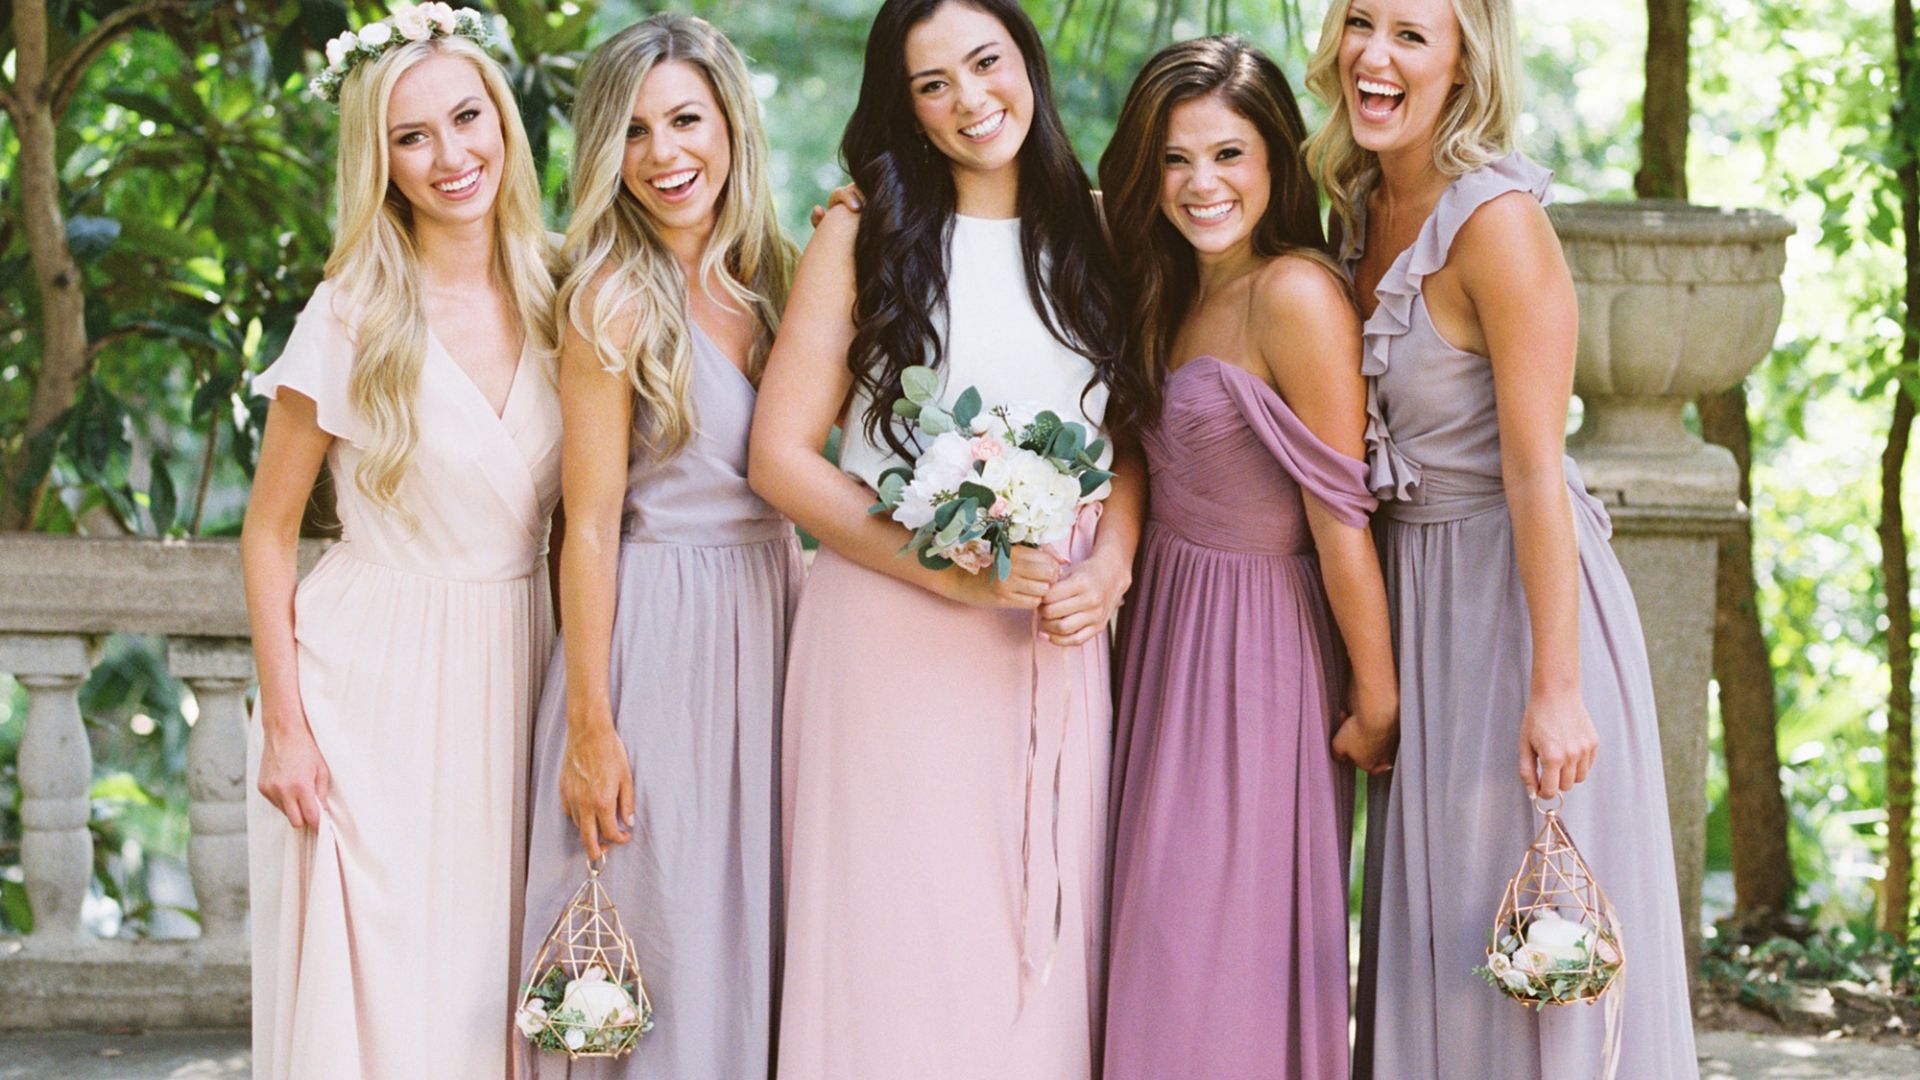 Ways to Allow Your Bridesmaids to Express Their Unique Style